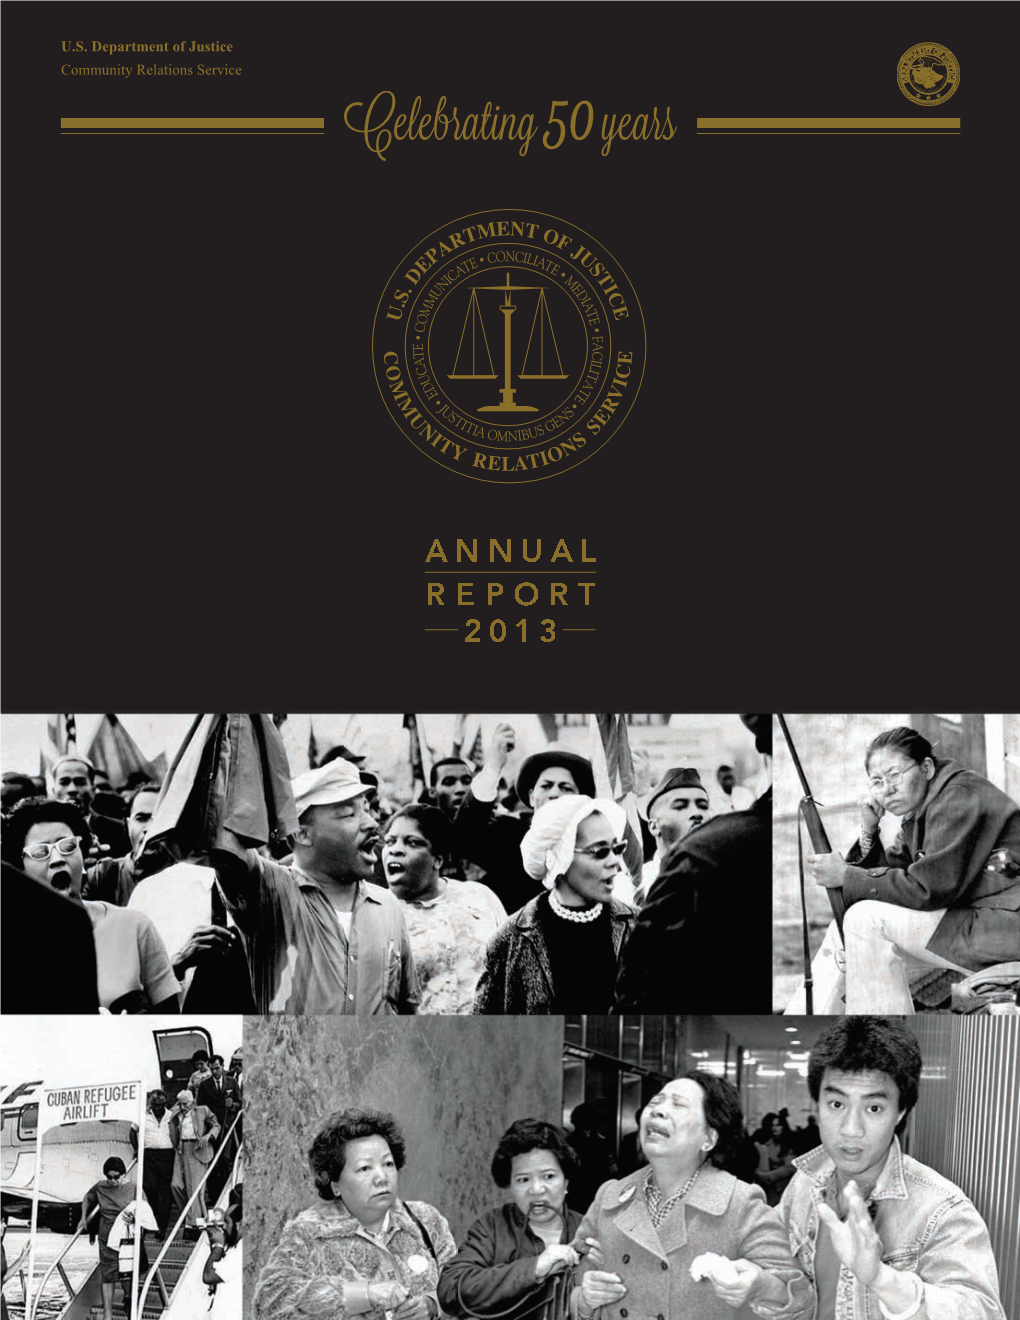 ANNUAL REPORT 2013 Photos from the Cover